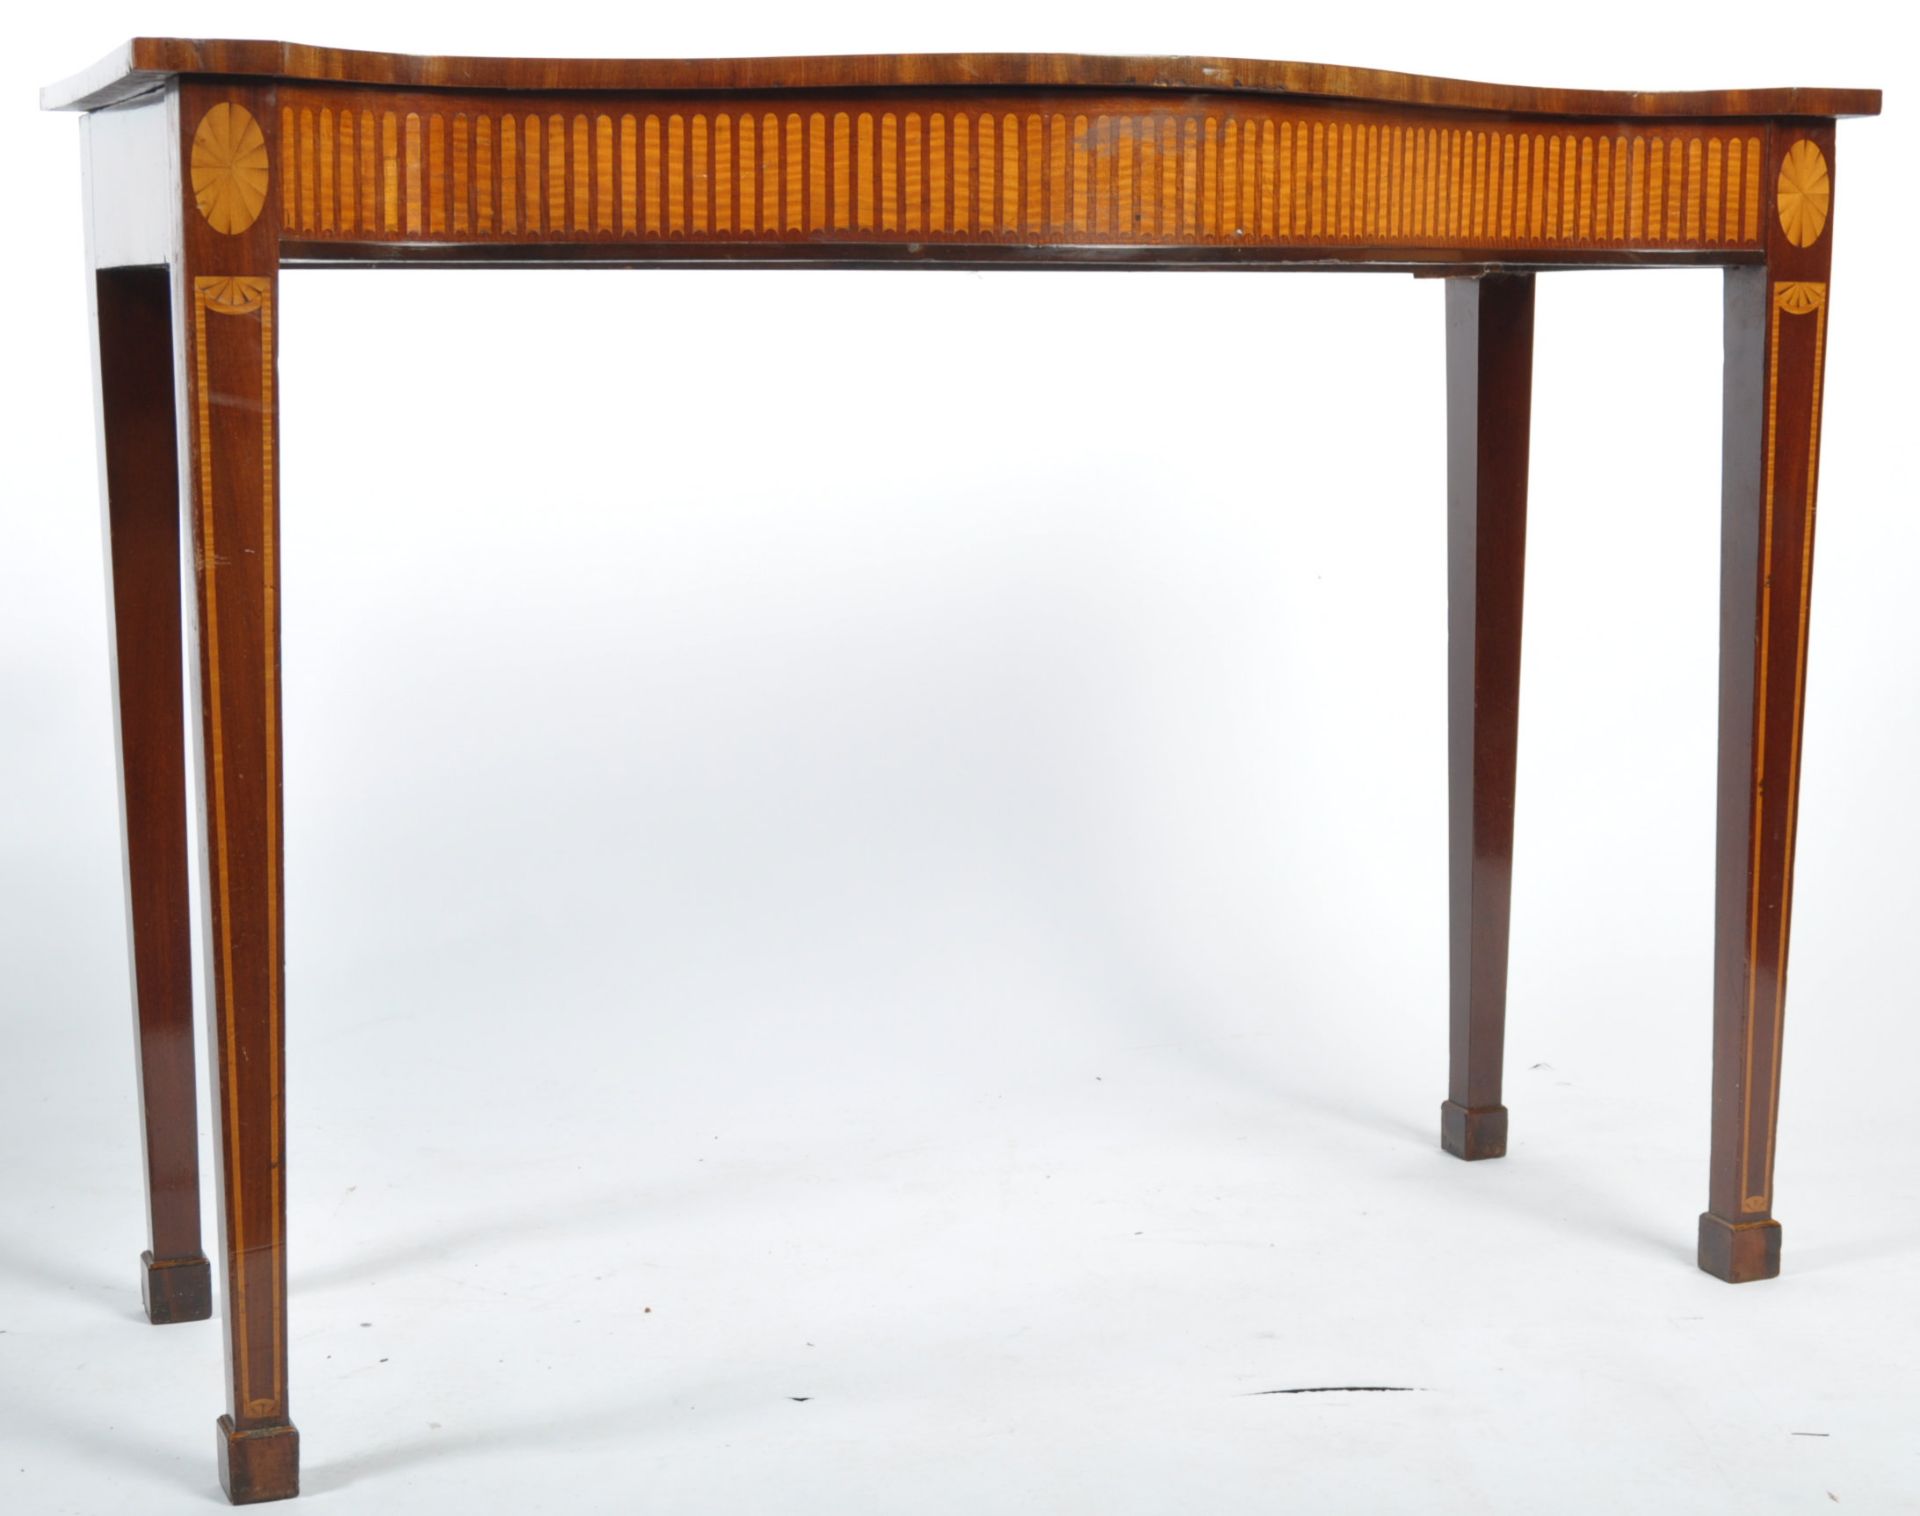 19TH CENTURY MAHOGANY AND SATINWOOD INLAY SIDE TABLE